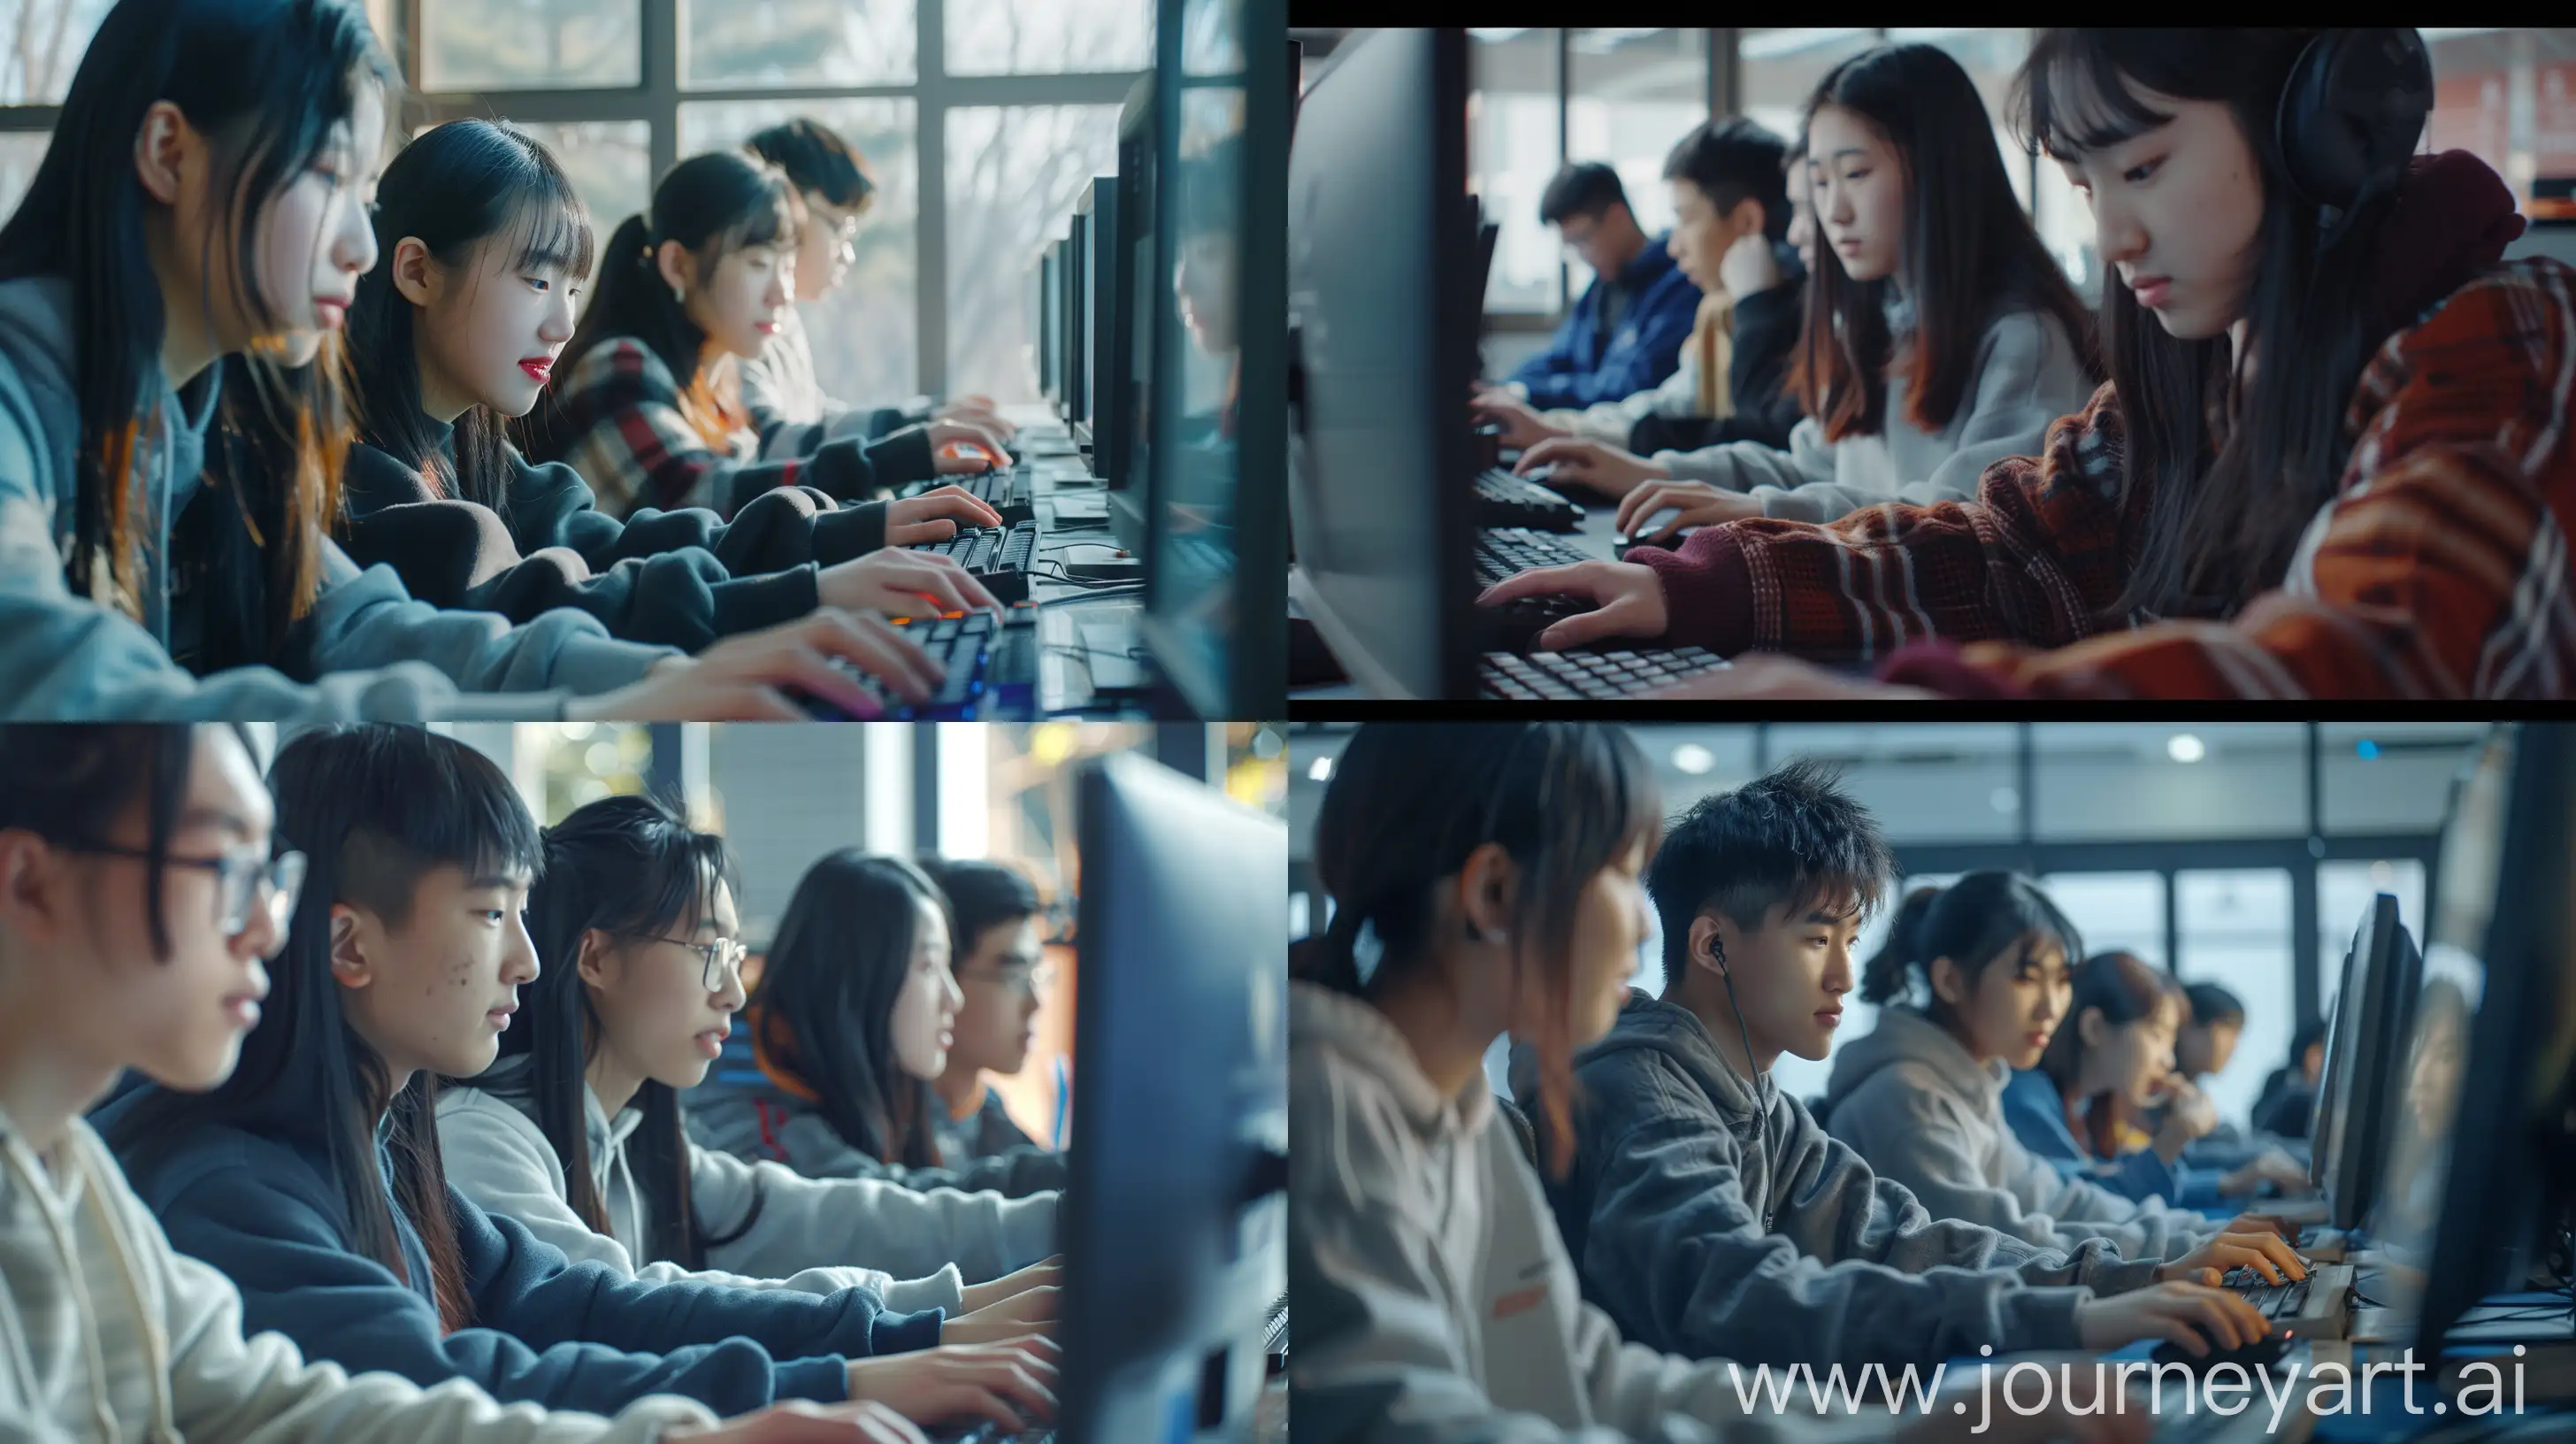 20-year-old Asian college students are operating the computers,
their fingers dance upon the keys, while others watch and discuss together.
The natural light pours in and shine, with a warm glow.
The atmosphere is relaxed and joyful. winter, 8k --ar 16:9 